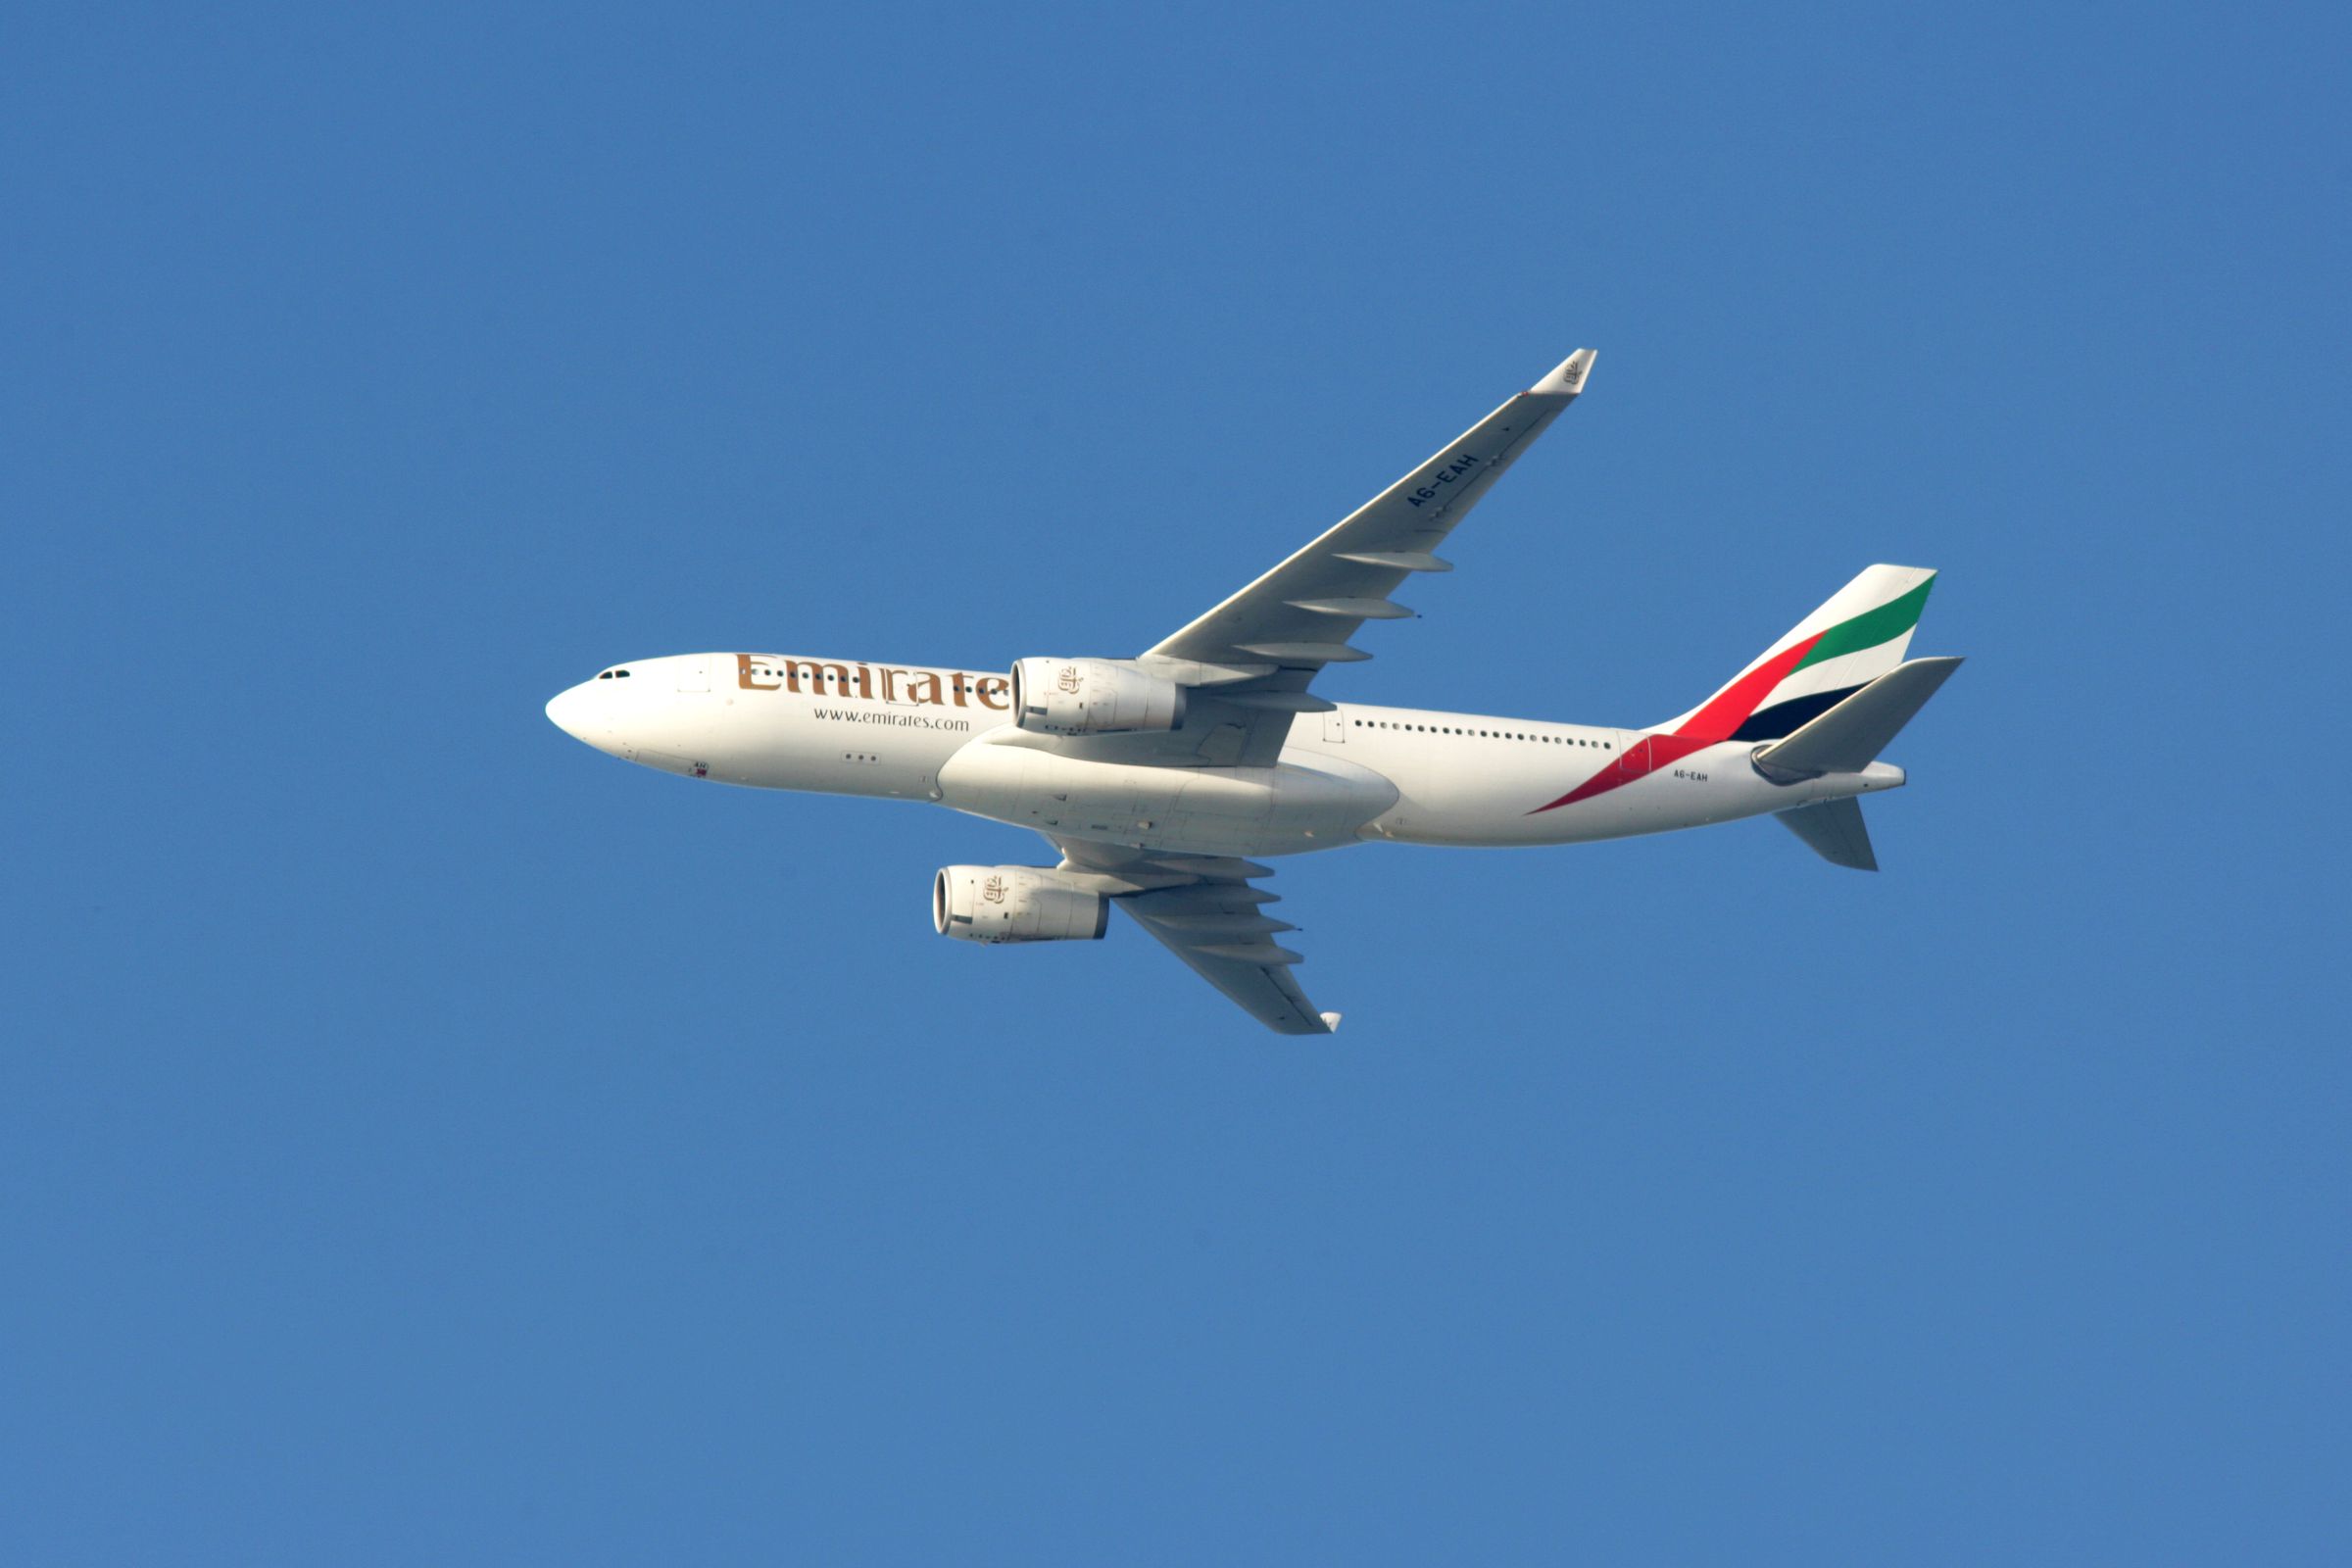 Emirates is one of nine airlines affected by the electronics ban, which covers 10 airports located in eight Muslim-majority countries. 